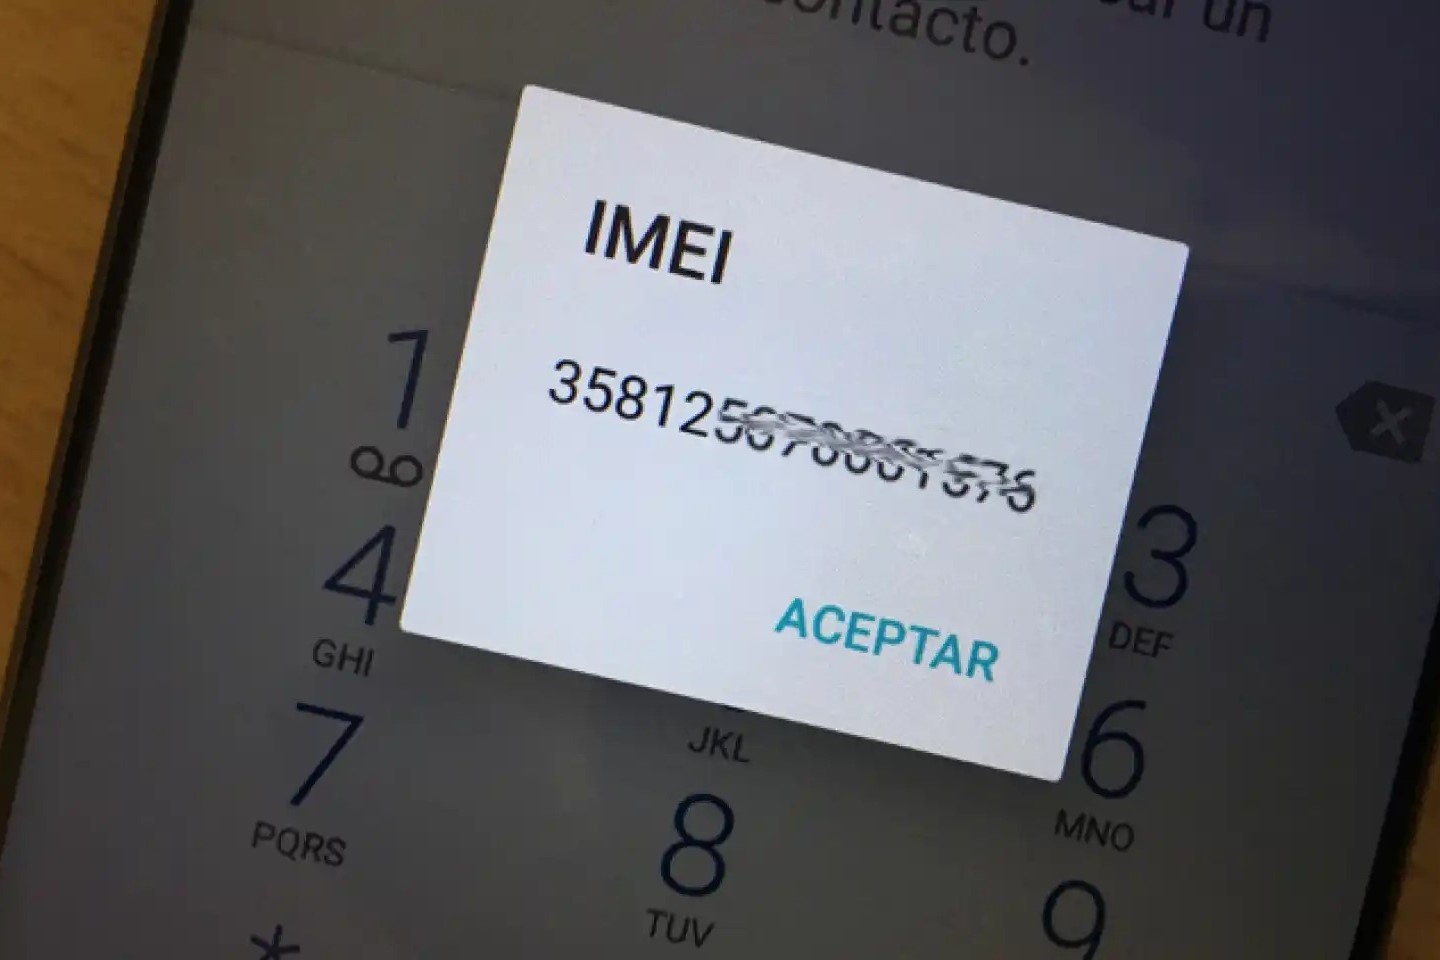 Identifying Activated SIM Card Via IMEI Number: A Comprehensive Guide